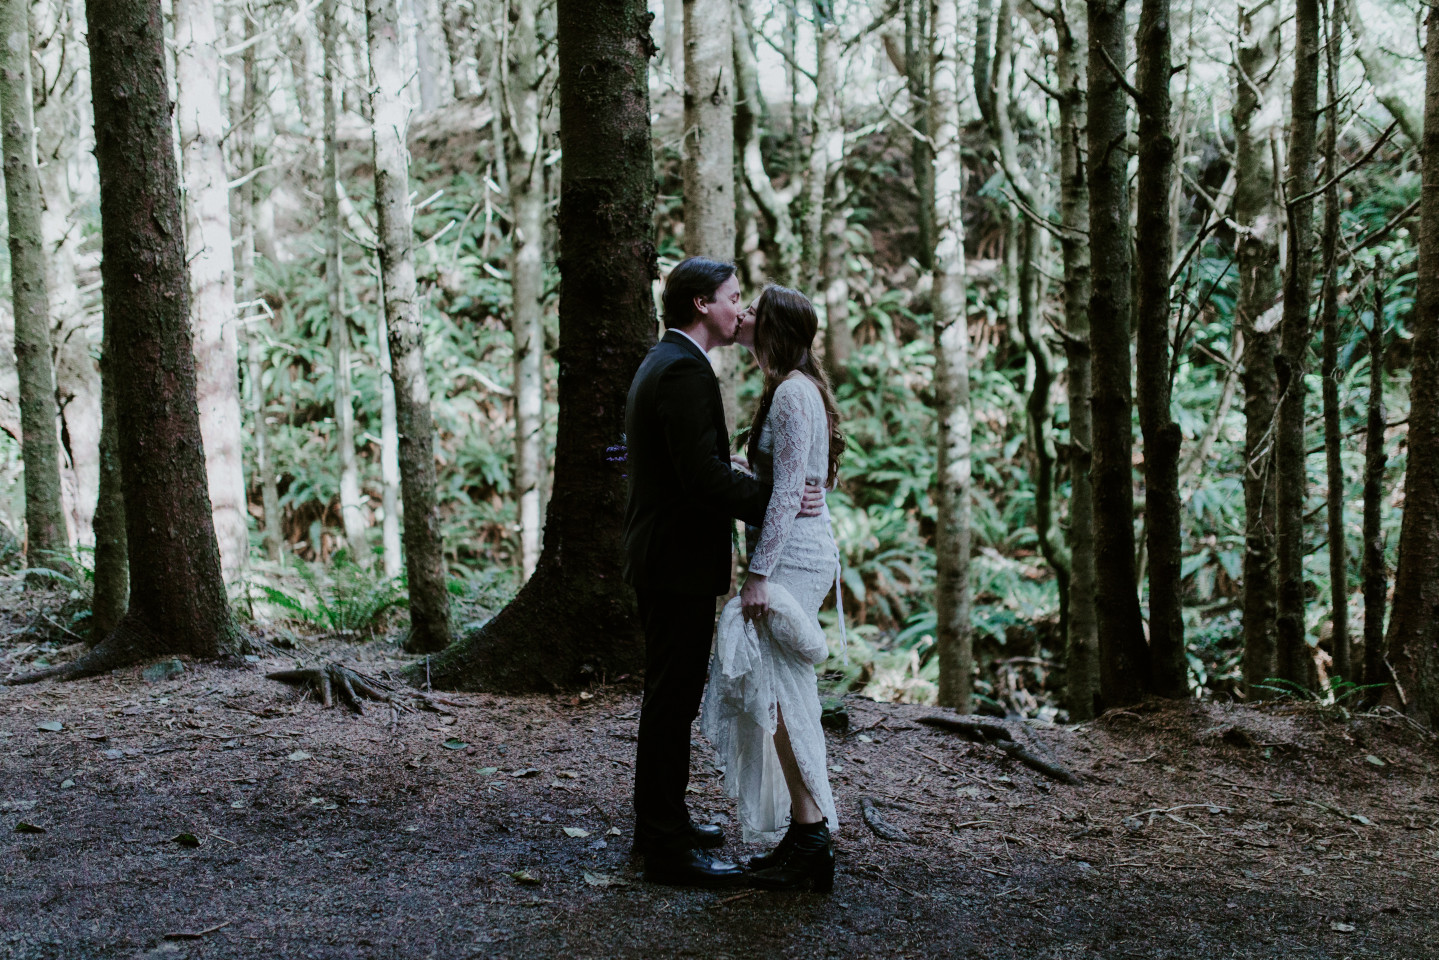 Vlad kisses Nicole. Elopement wedding photography at Cannon Beach by Sienna Plus Josh.